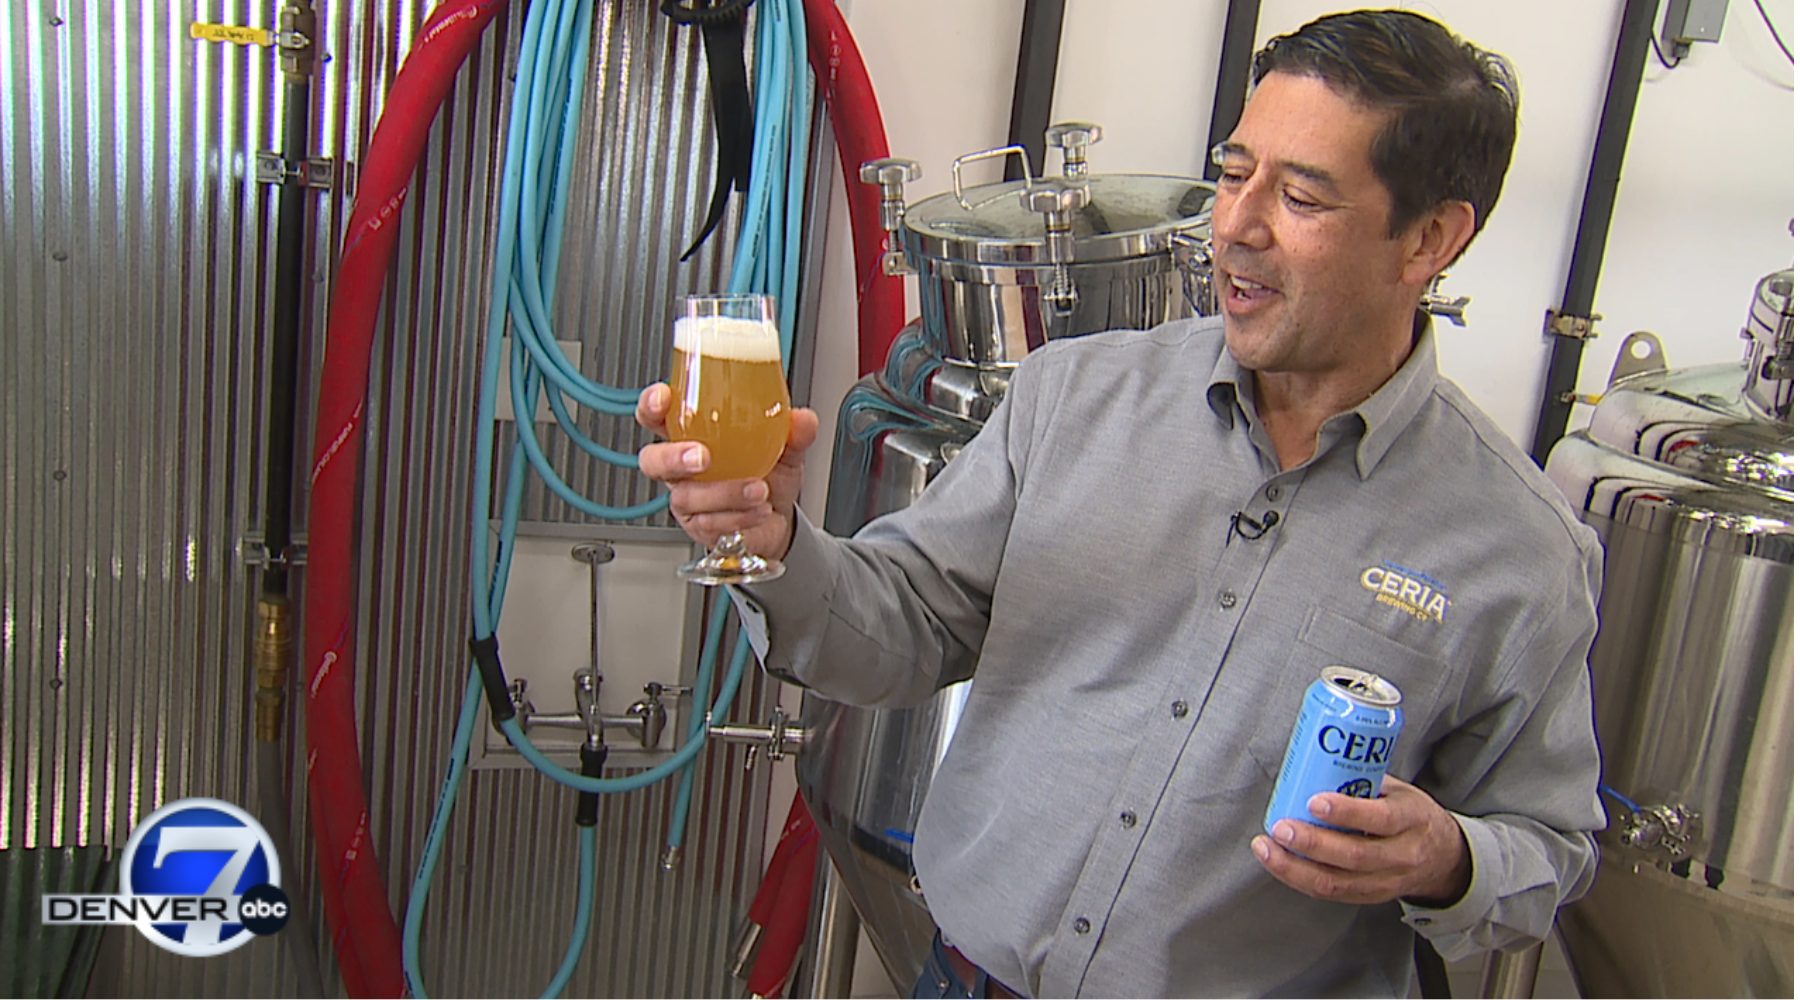 ABC Denver 7: Colorado brewers and bars are creating alcohol free experiences for 'Dry January' and beyond